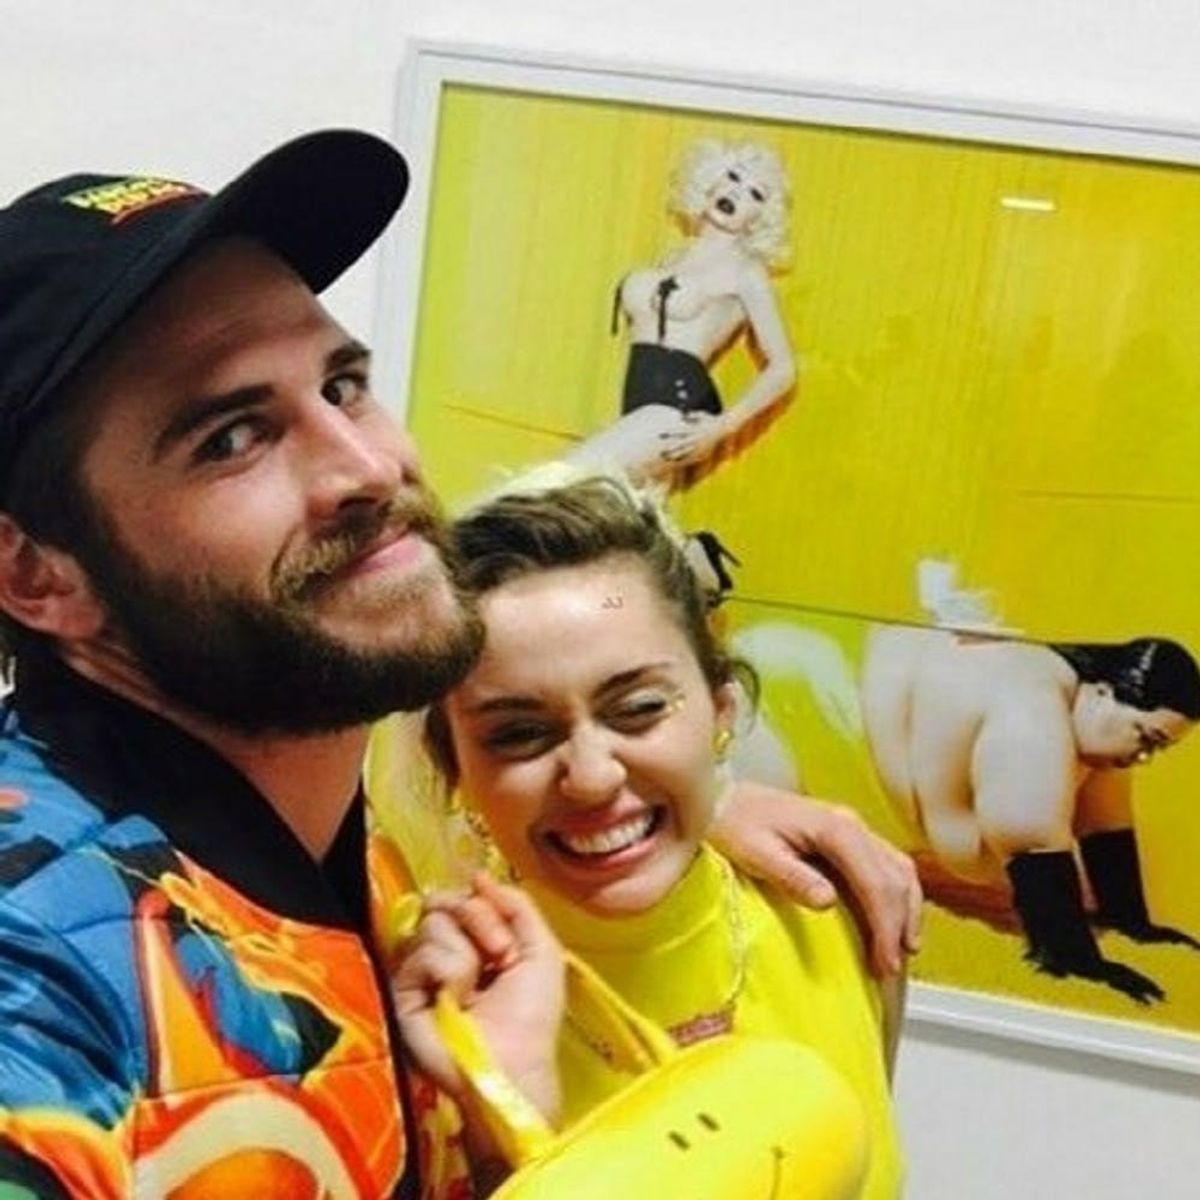 Liam Hemsworth Wished Miley Cyrus a Happy Birthday in the Sweetest Way Possible